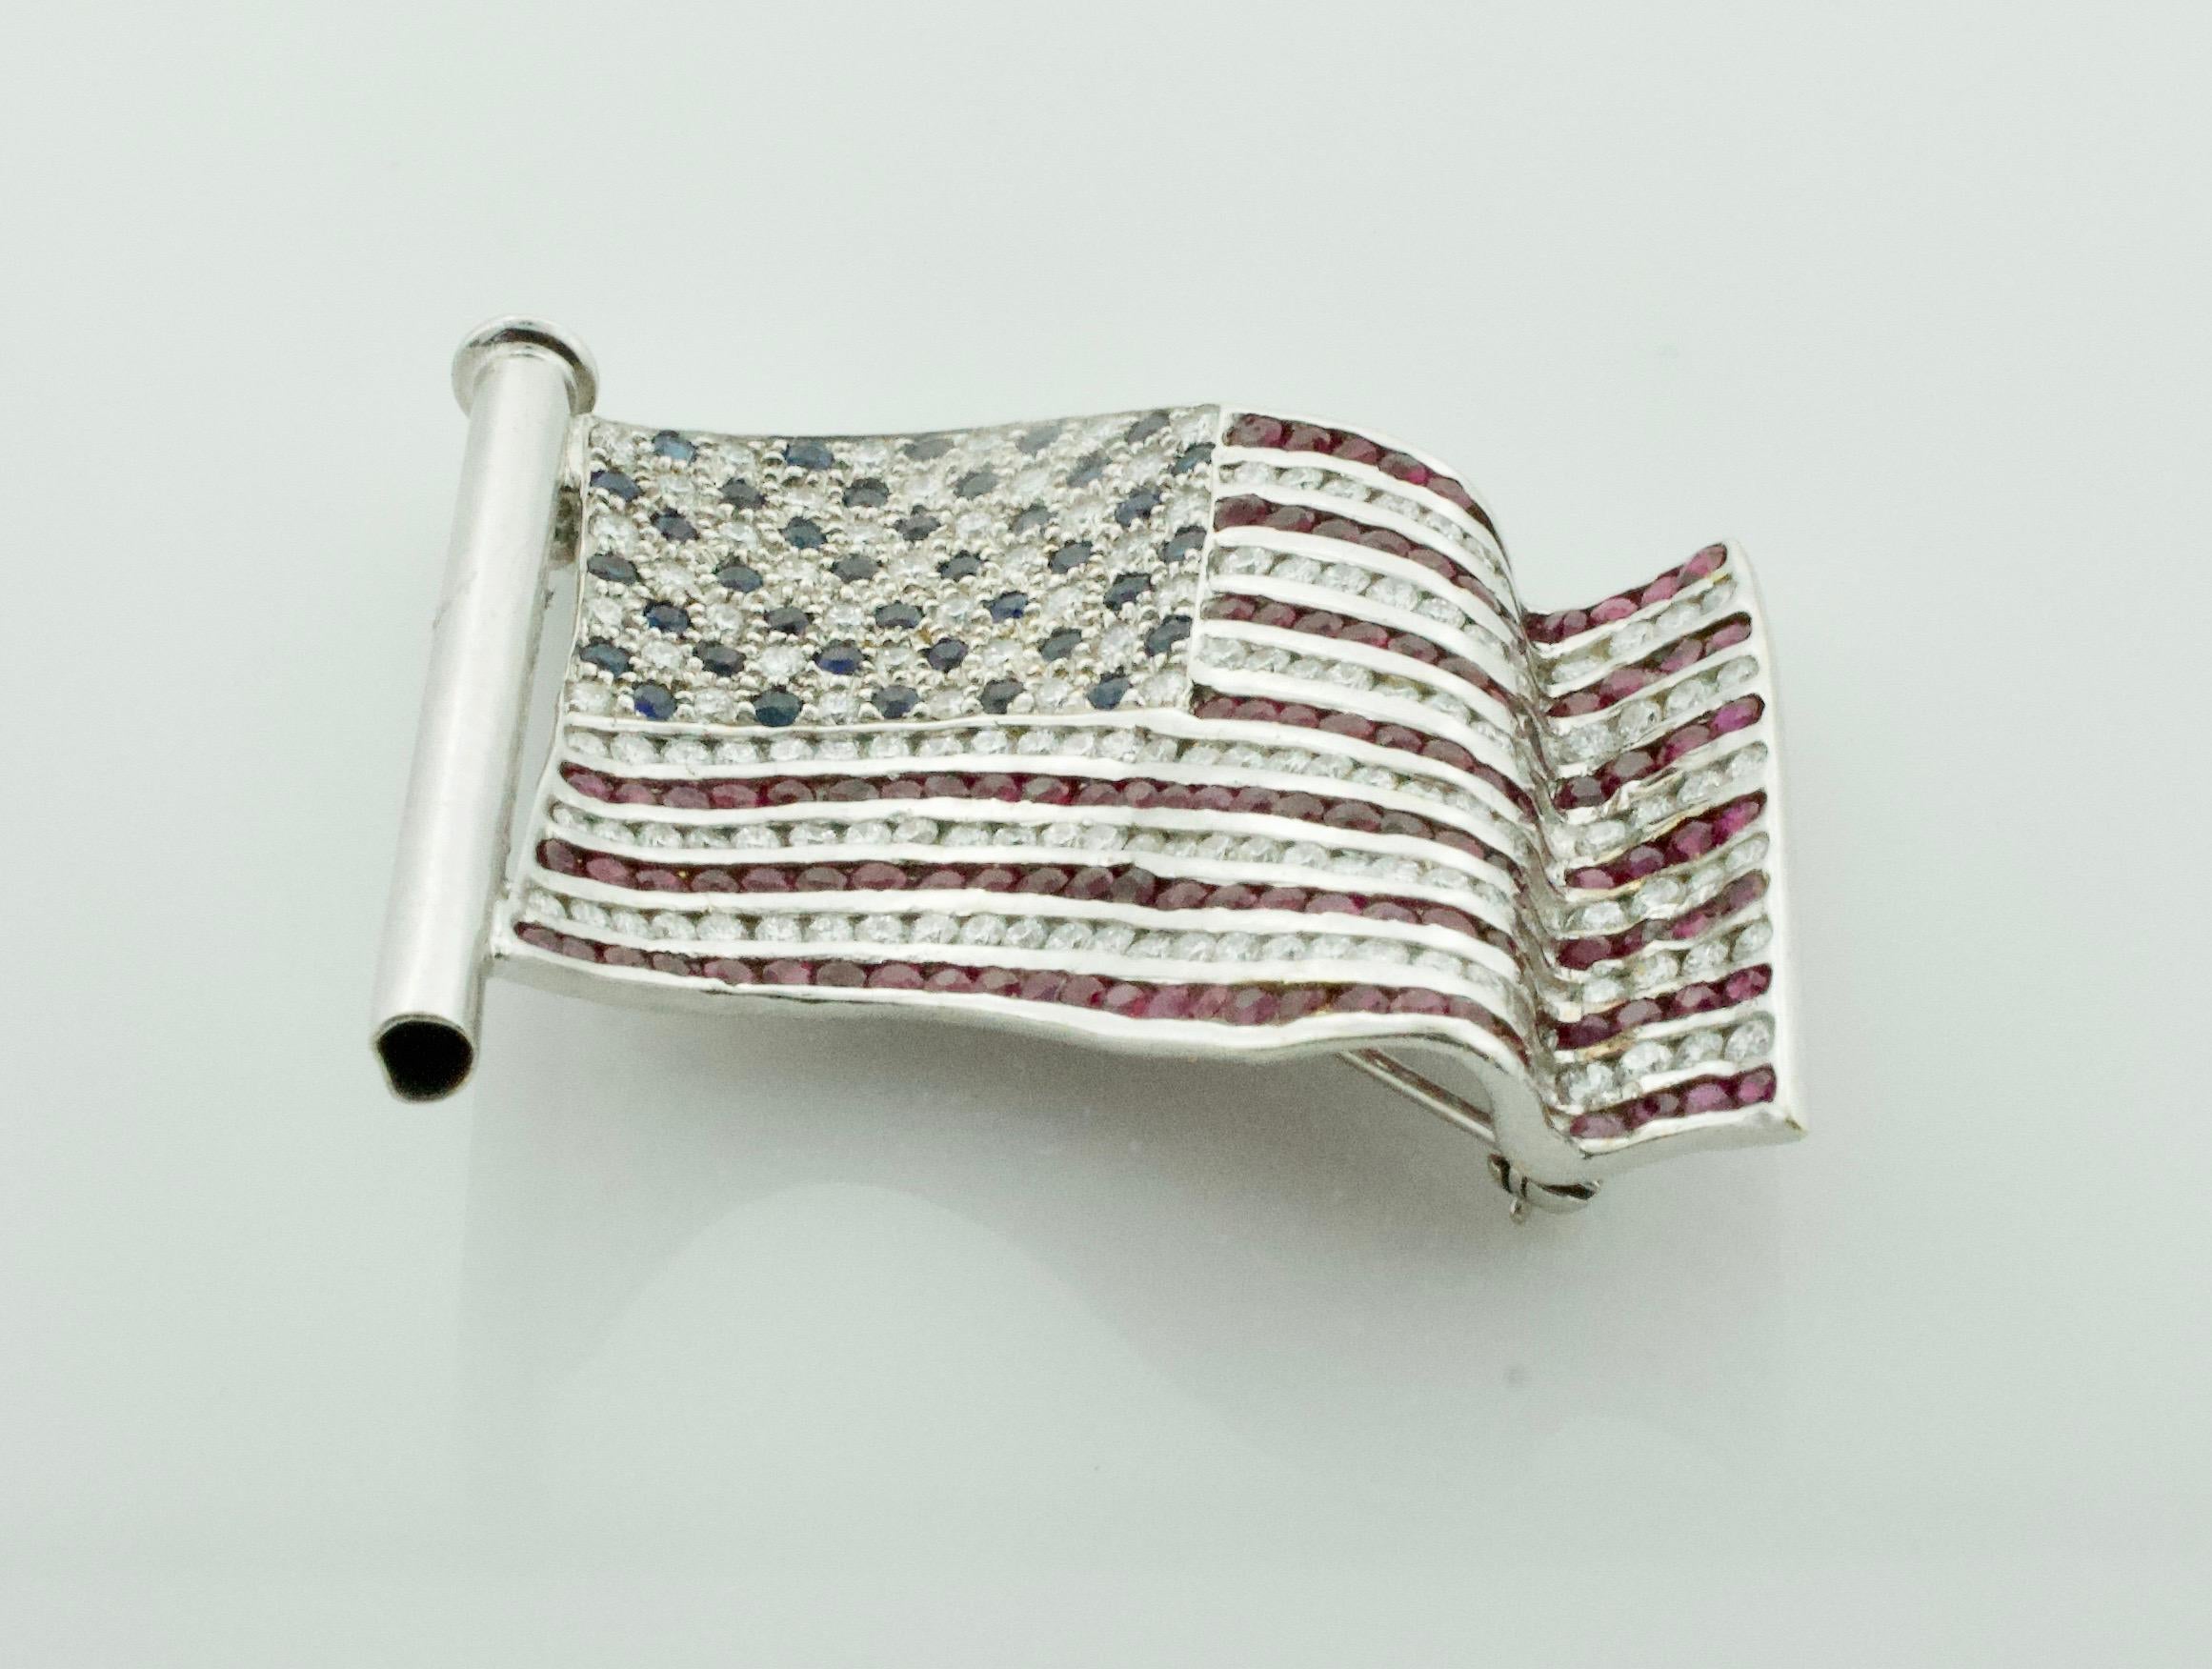 Introducing the breathtaking Large Patriotic United States Diamond, Ruby and Sapphire Flag Brooch in 18k - a true masterpiece of fine jewelry that embodies the essence of American patriotism and pride.

Crafted from the finest 18k gold, this